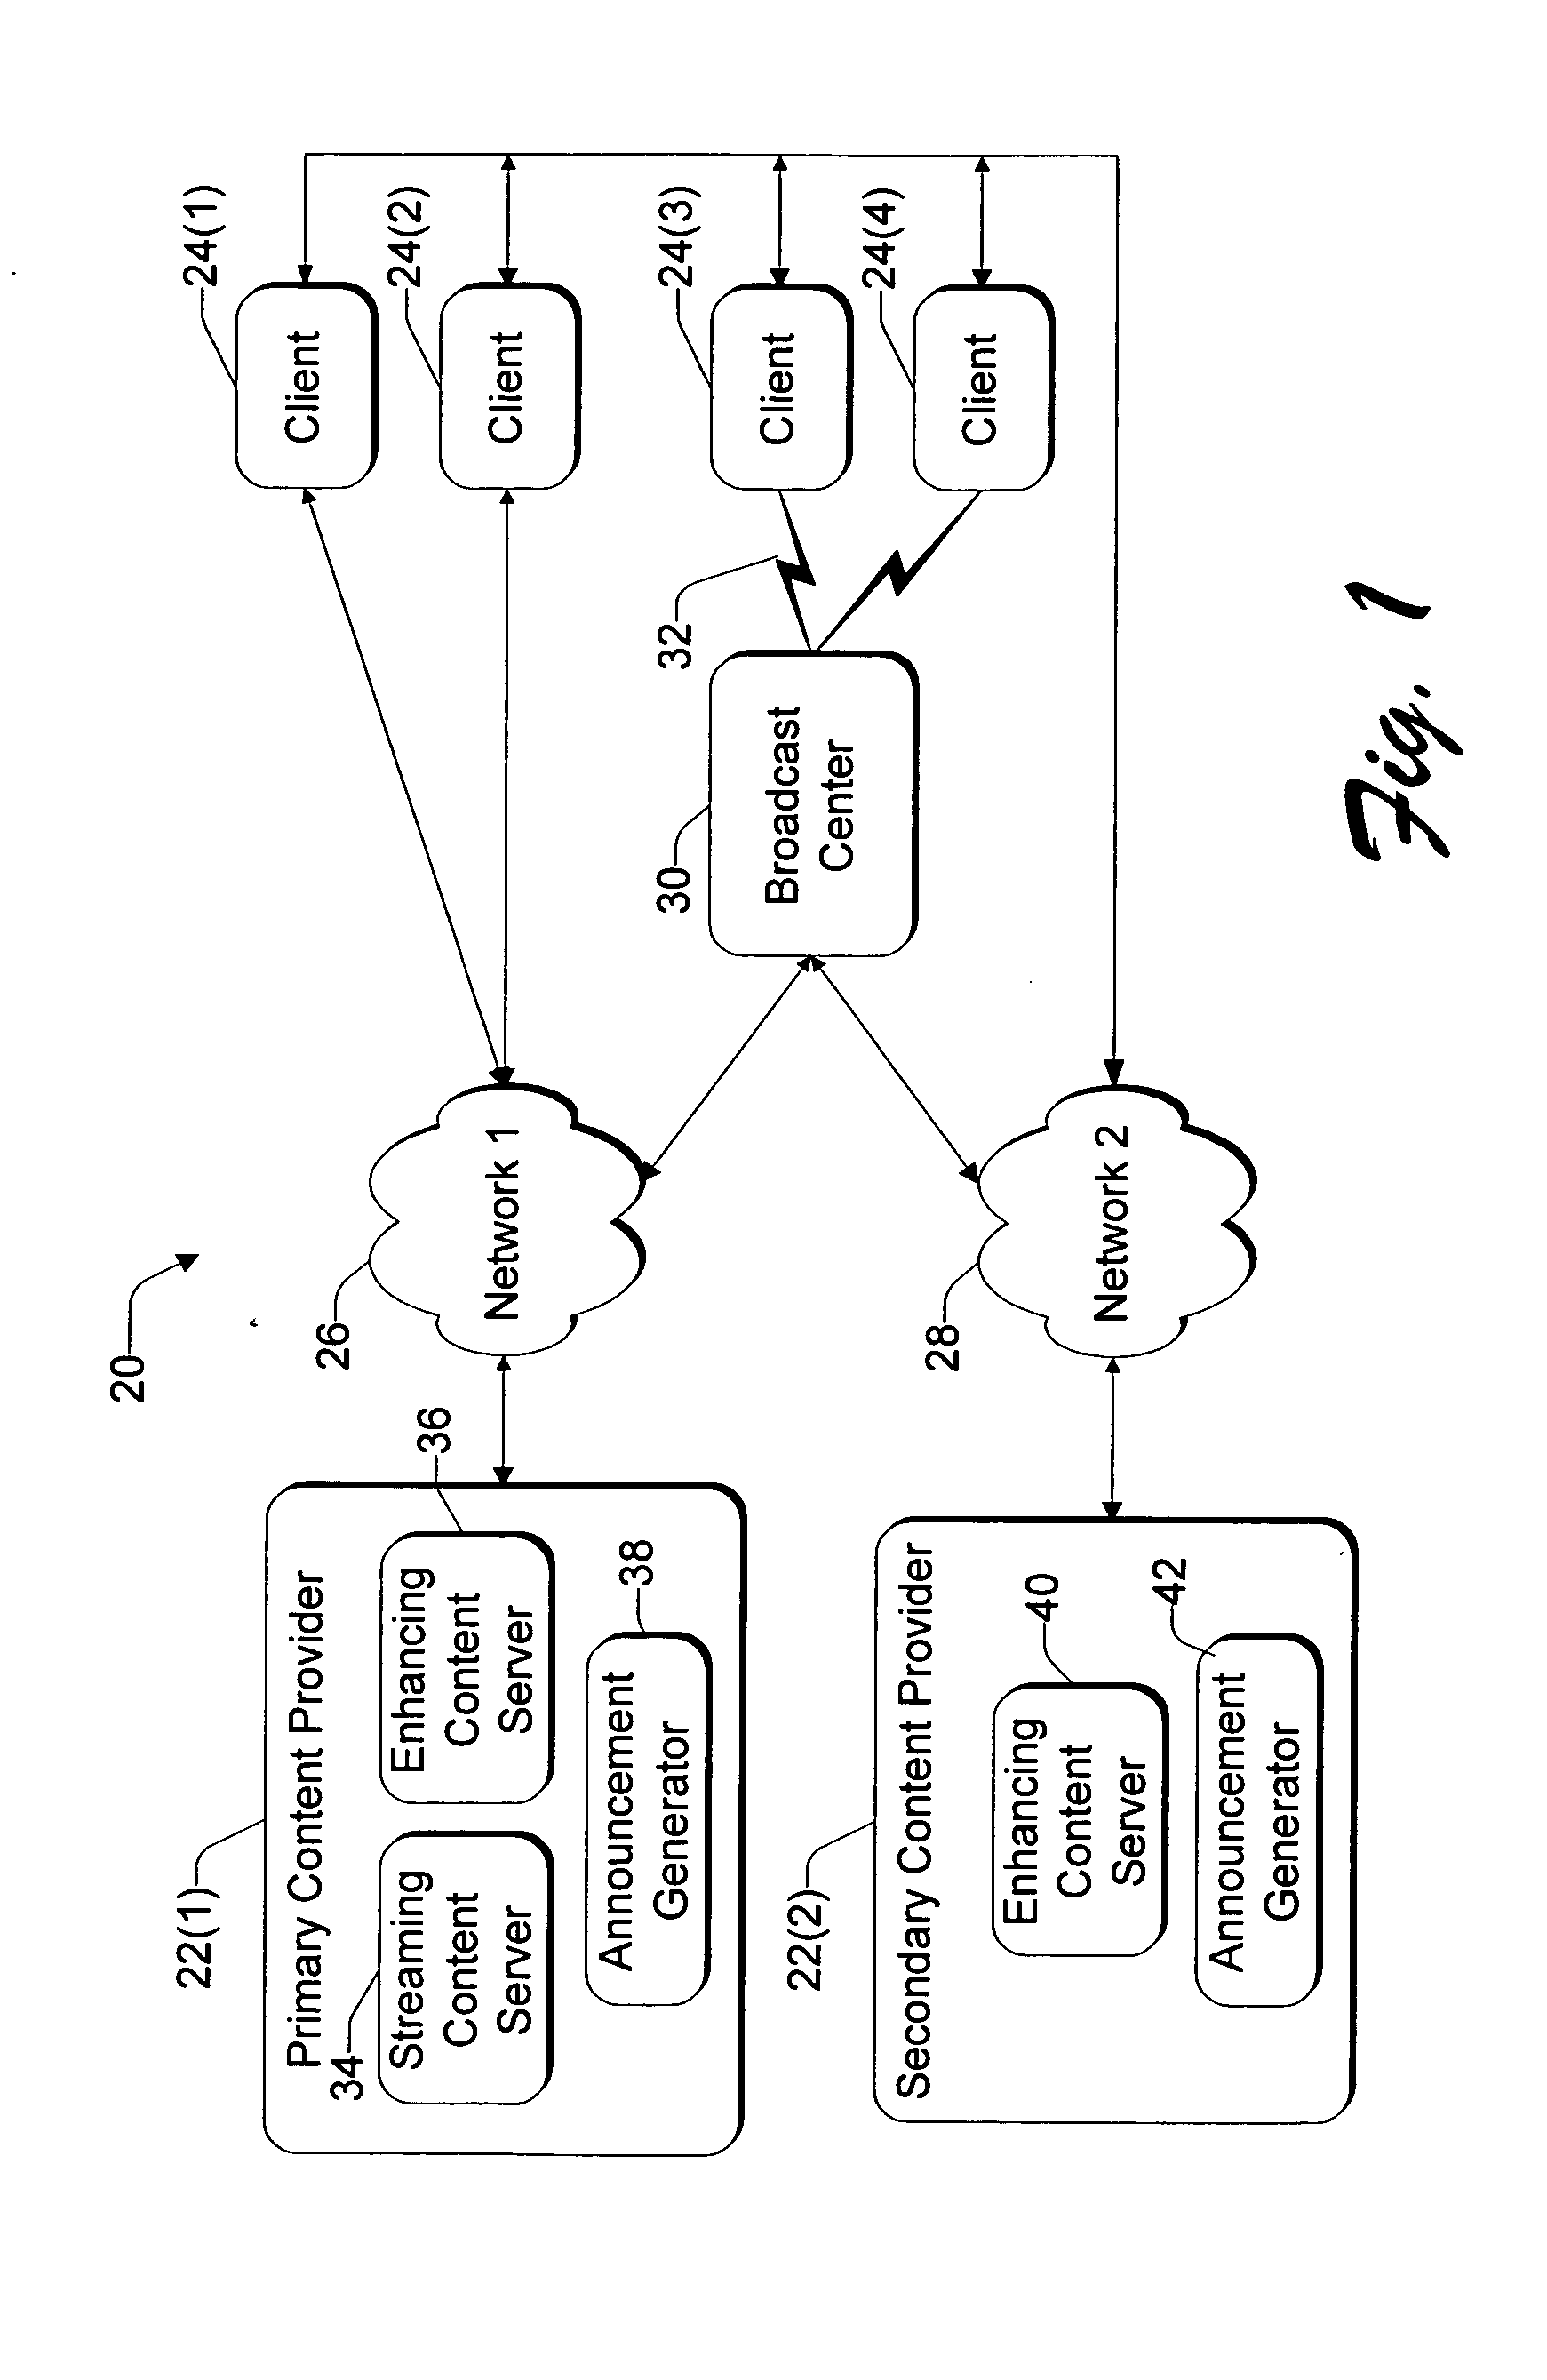 System and method for synchronizing streaming content with enhancing content using pre-announced triggers